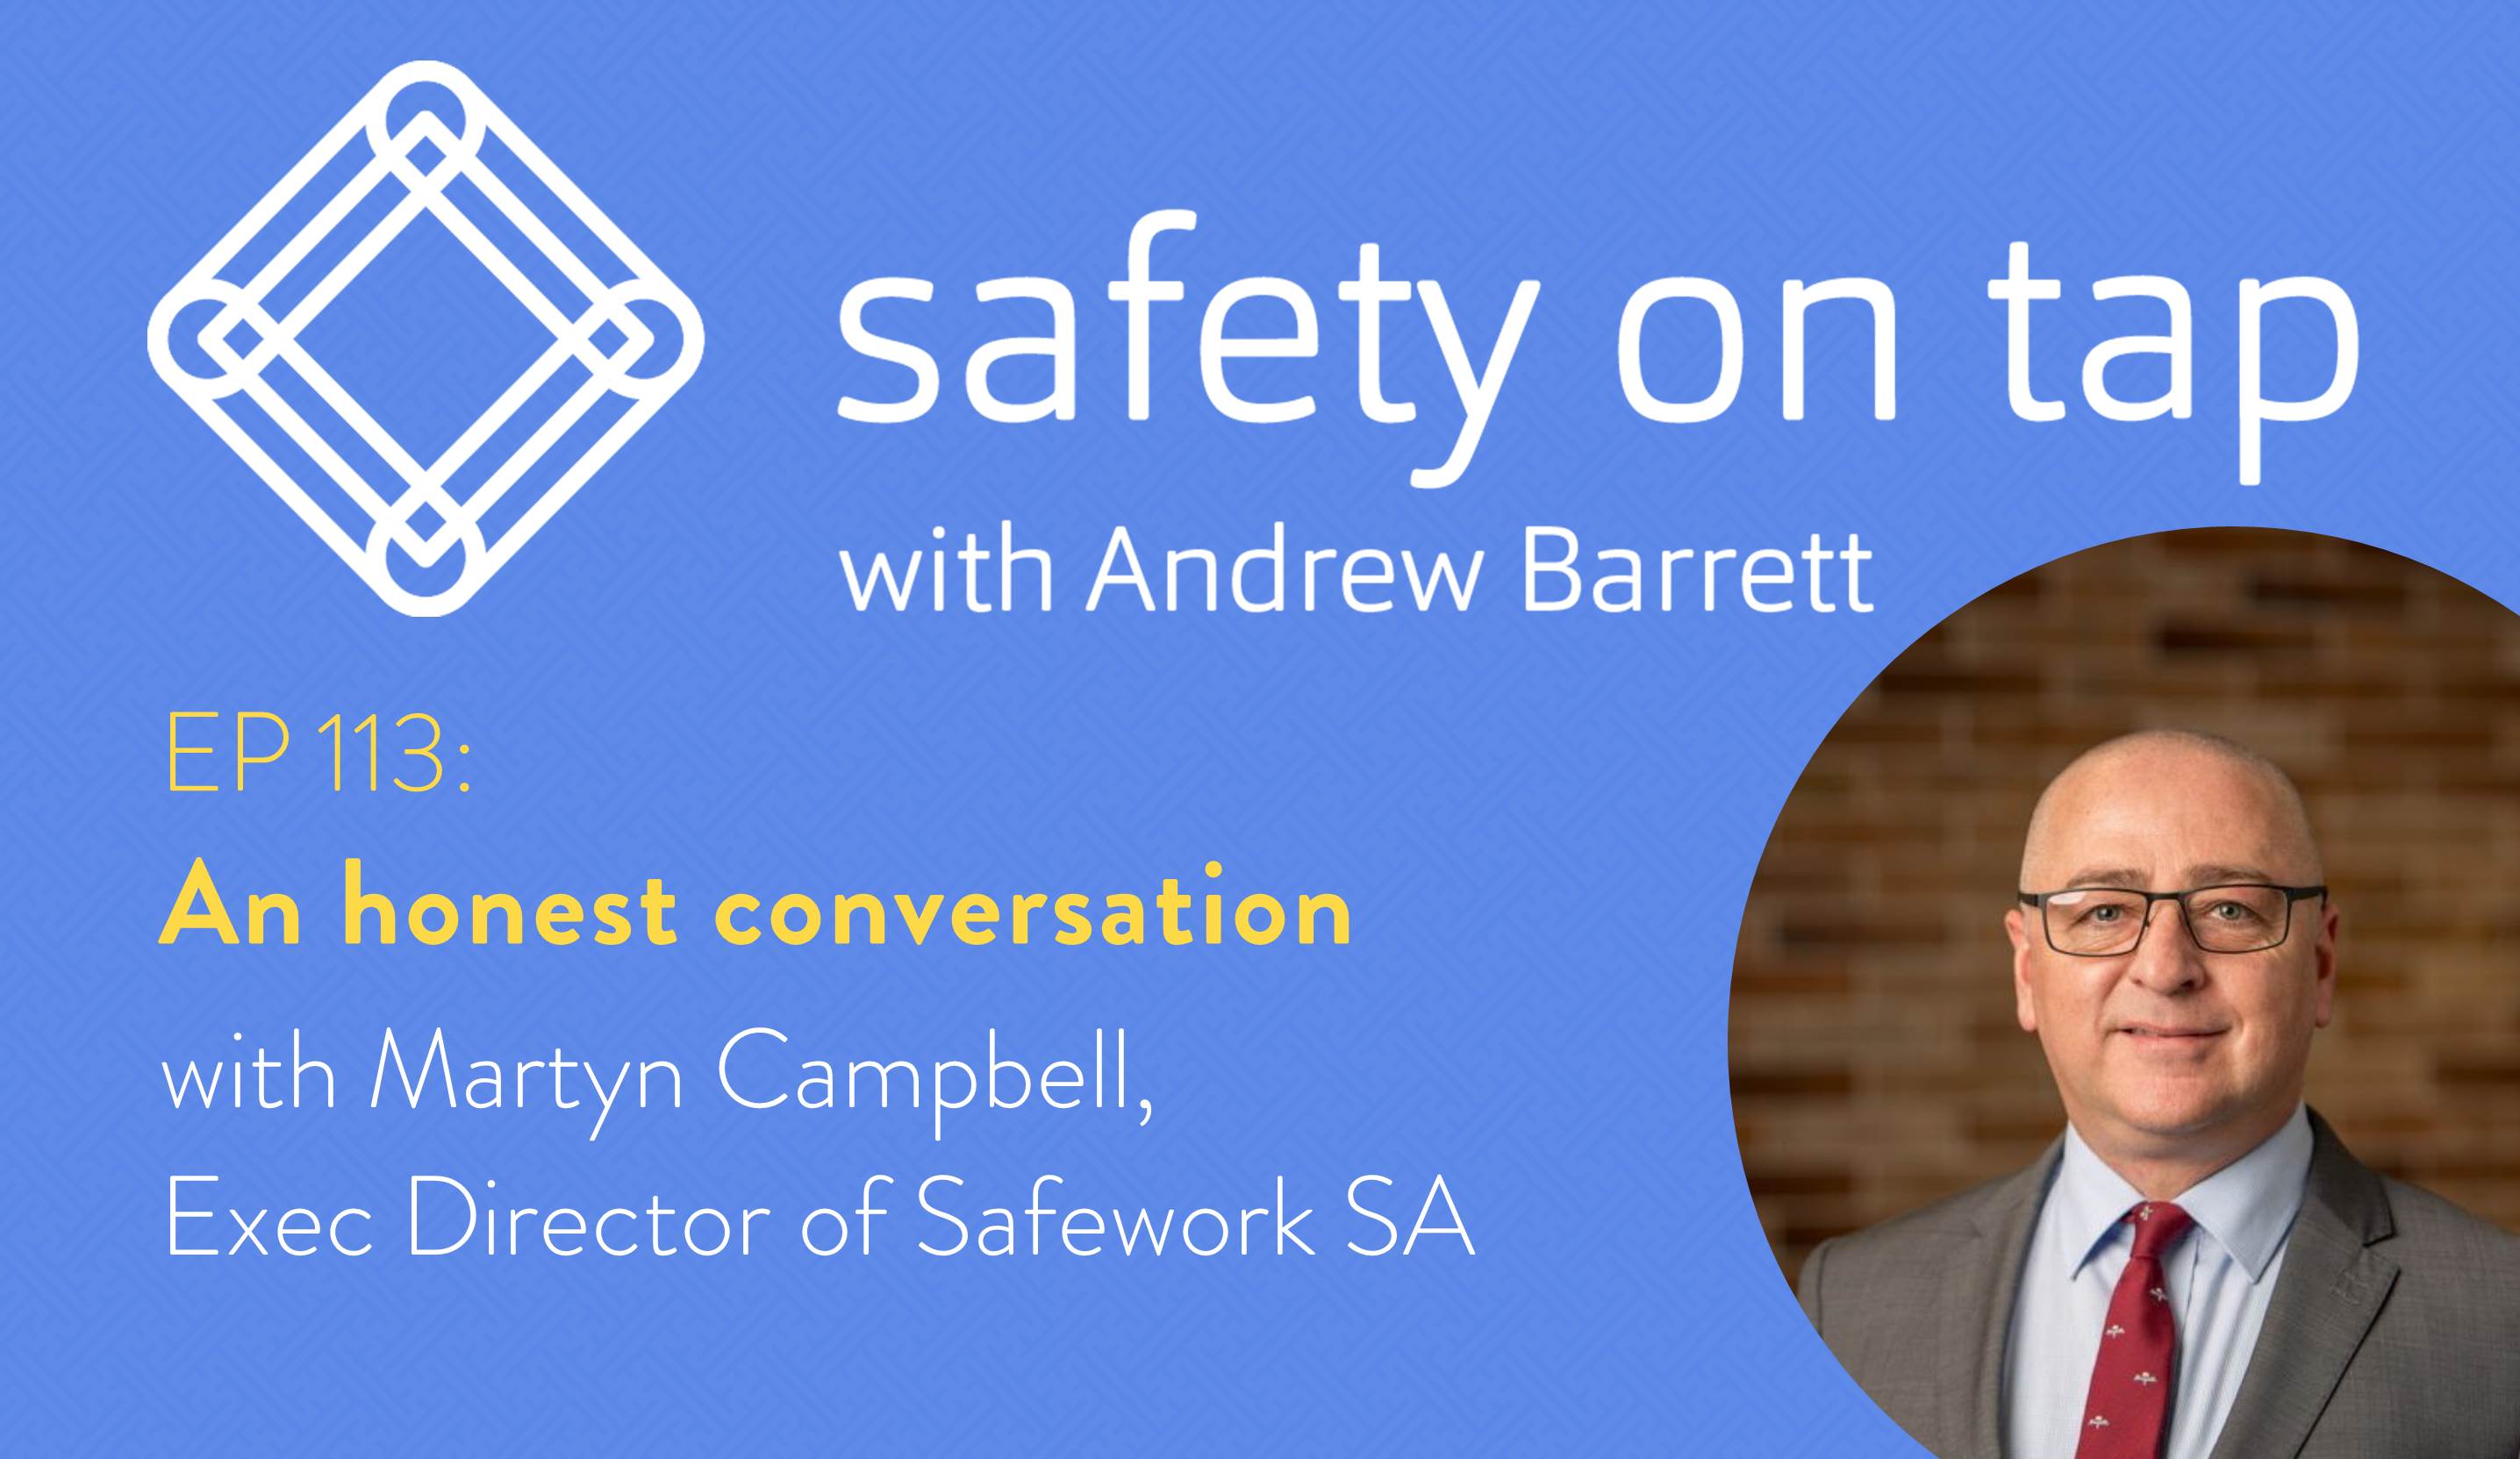 Ep113: An honest conversation with Martyn Campbell, Exec Director of Safework SA